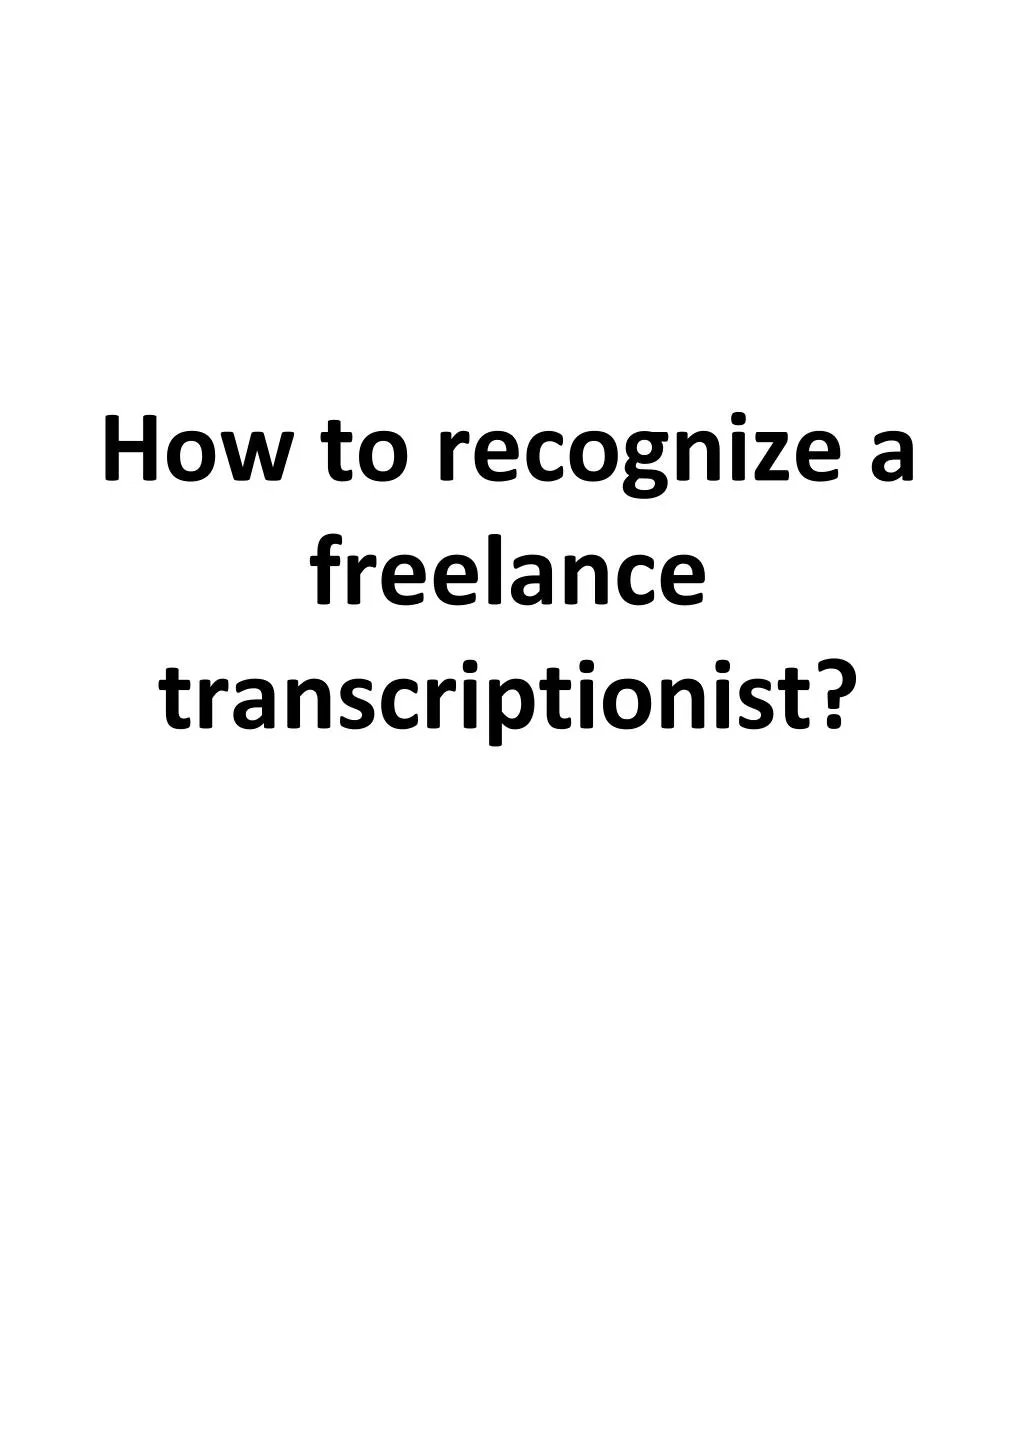 how to recognize a freelance transcriptionist